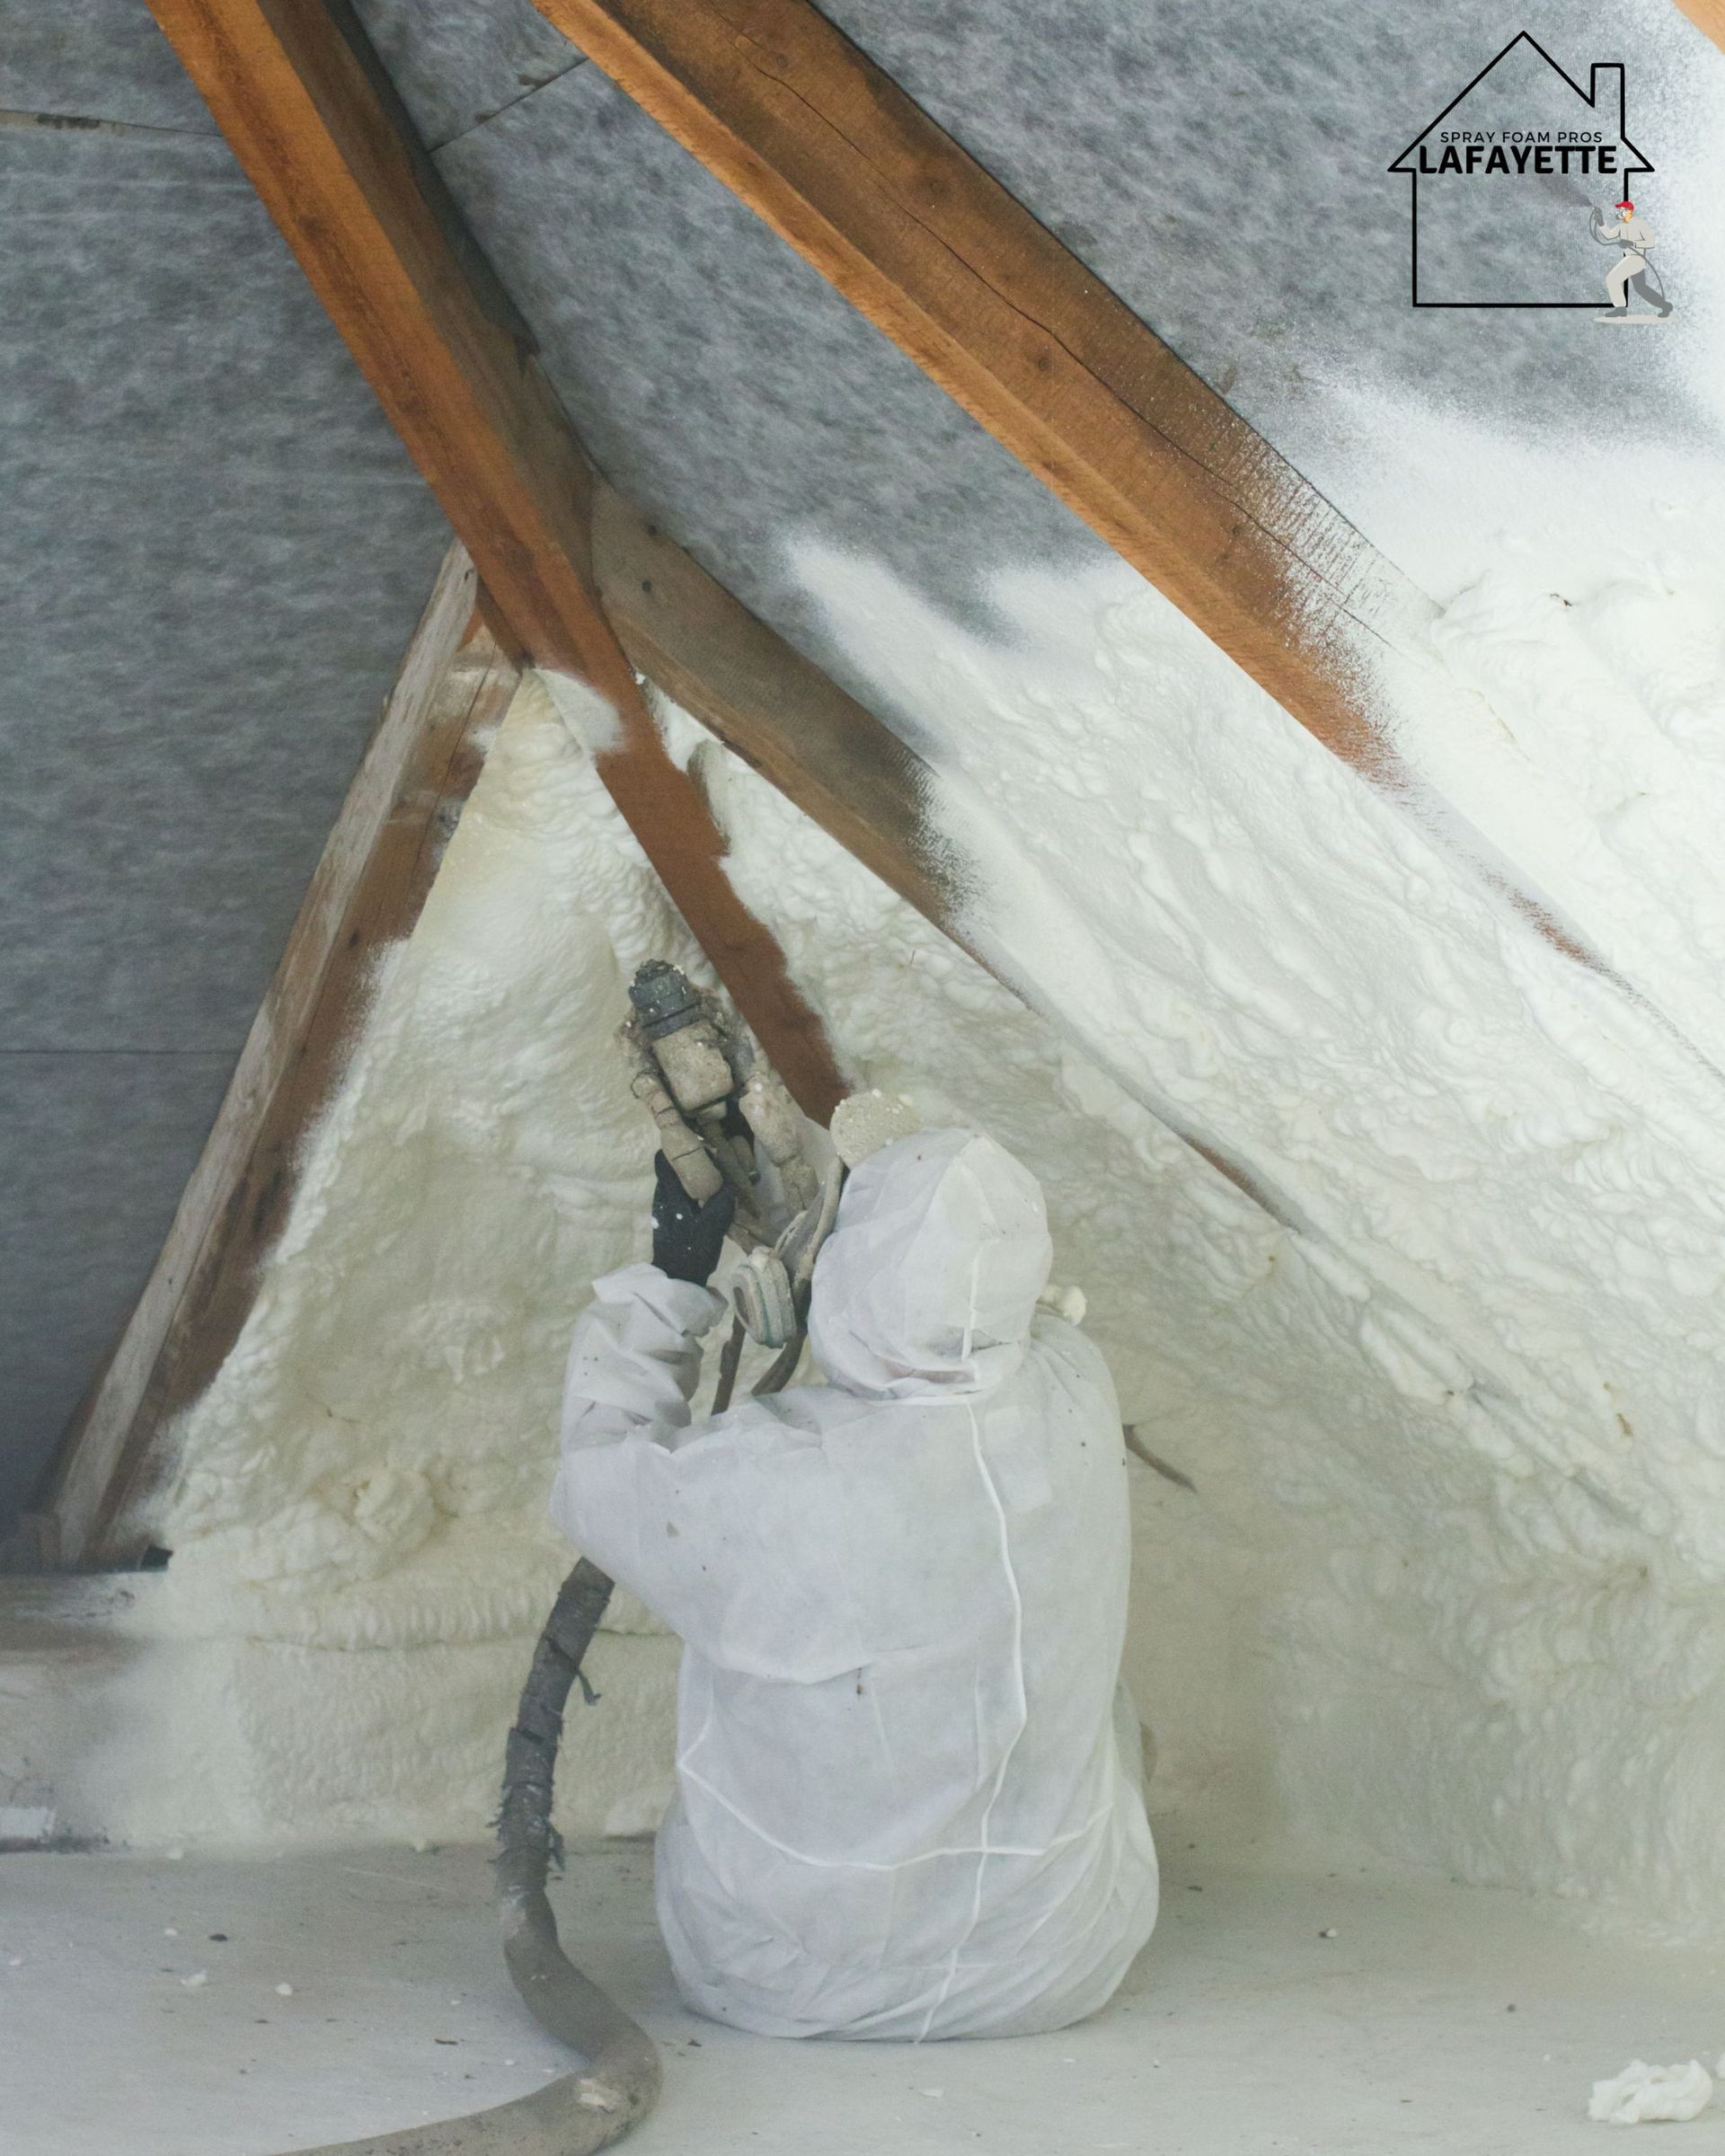 an expert in Lafayette performing spray foam insulation at a residential property